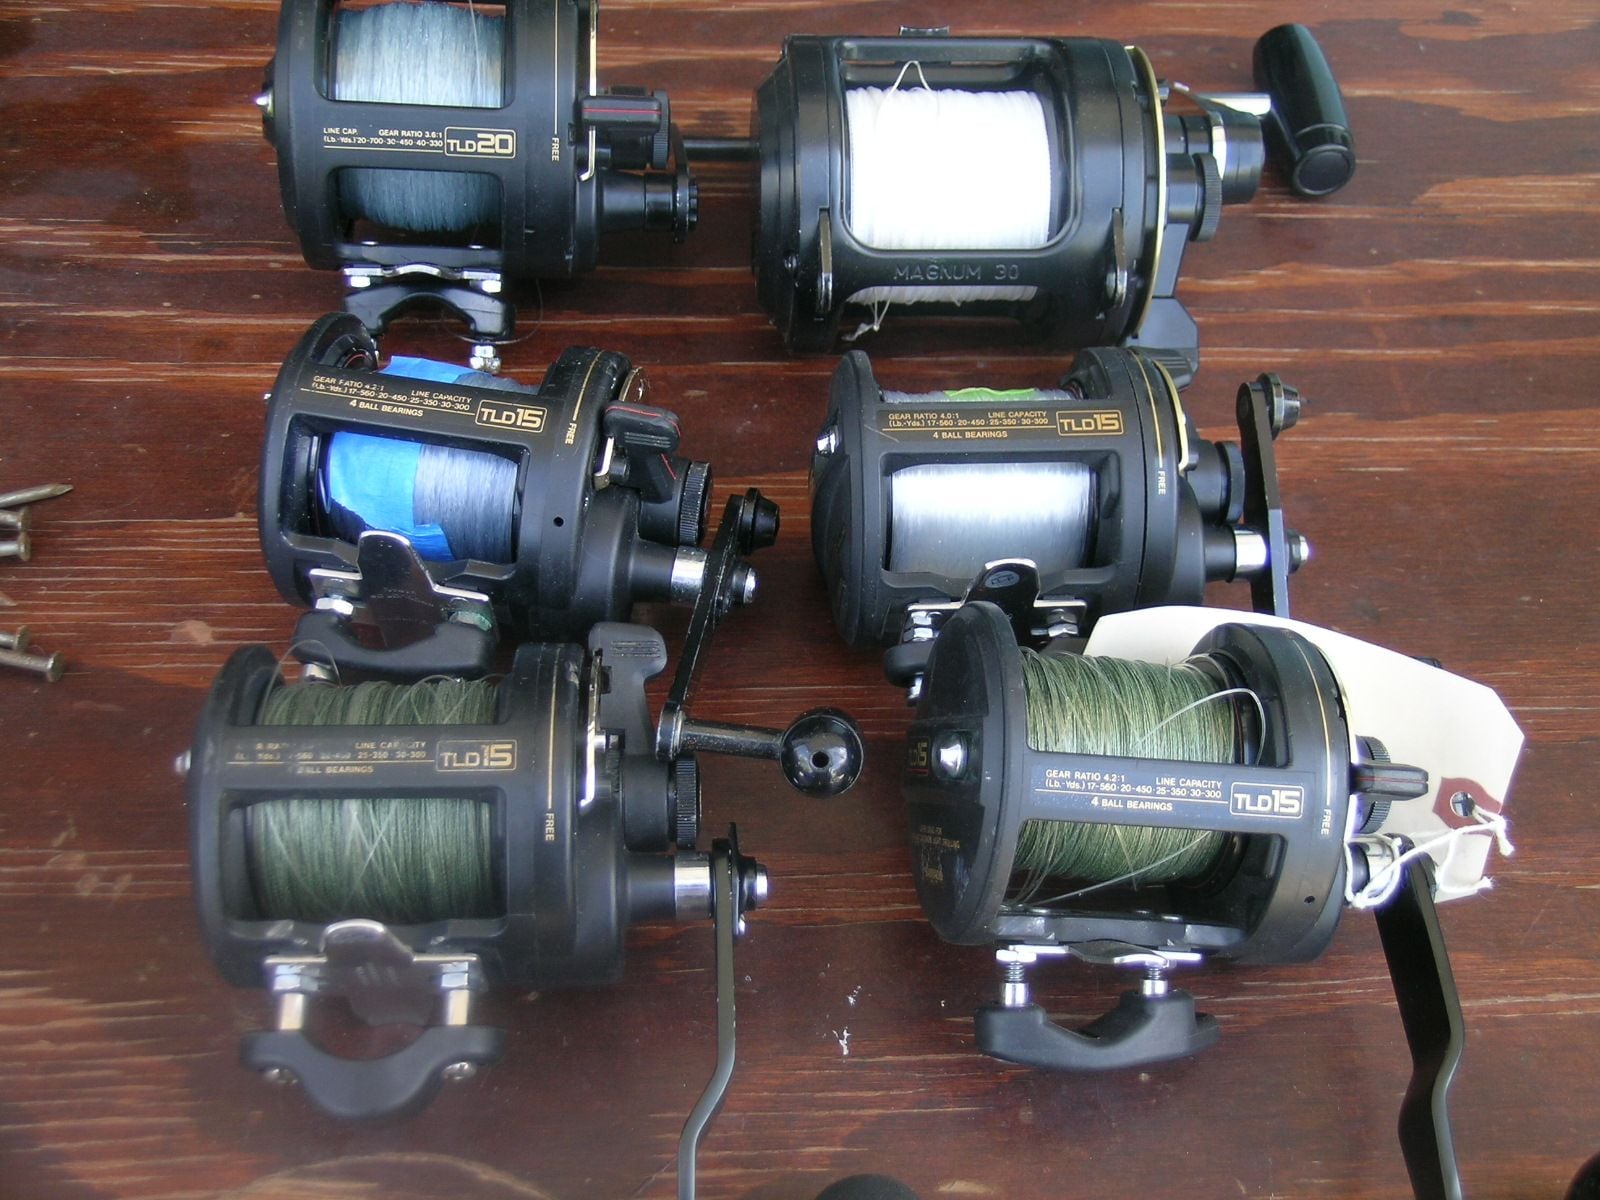 Shimano TLD-25's - Four Total - The Hull Truth - Boating and Fishing Forum